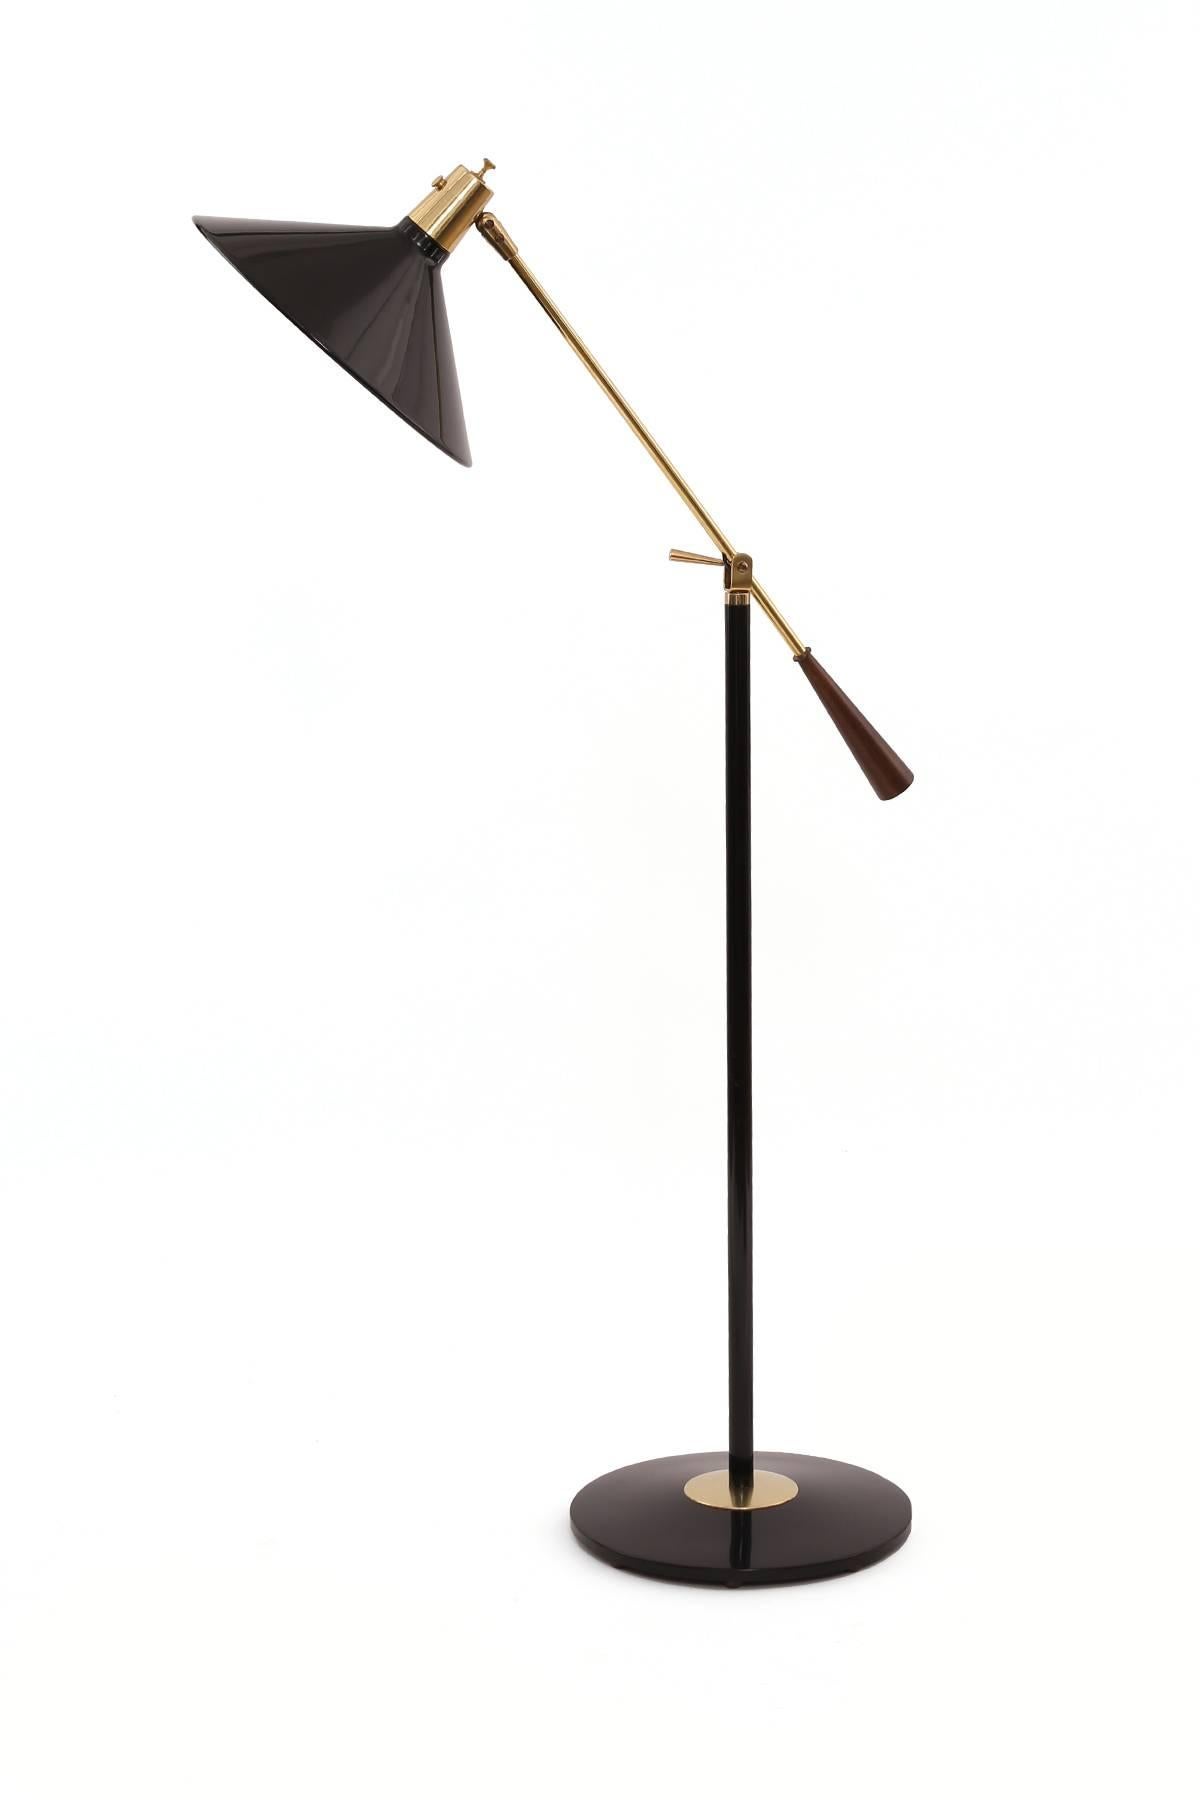 Mid-20th Century Pair of Enameled Metal Brass and Wood Floor Lamps by Lightolier